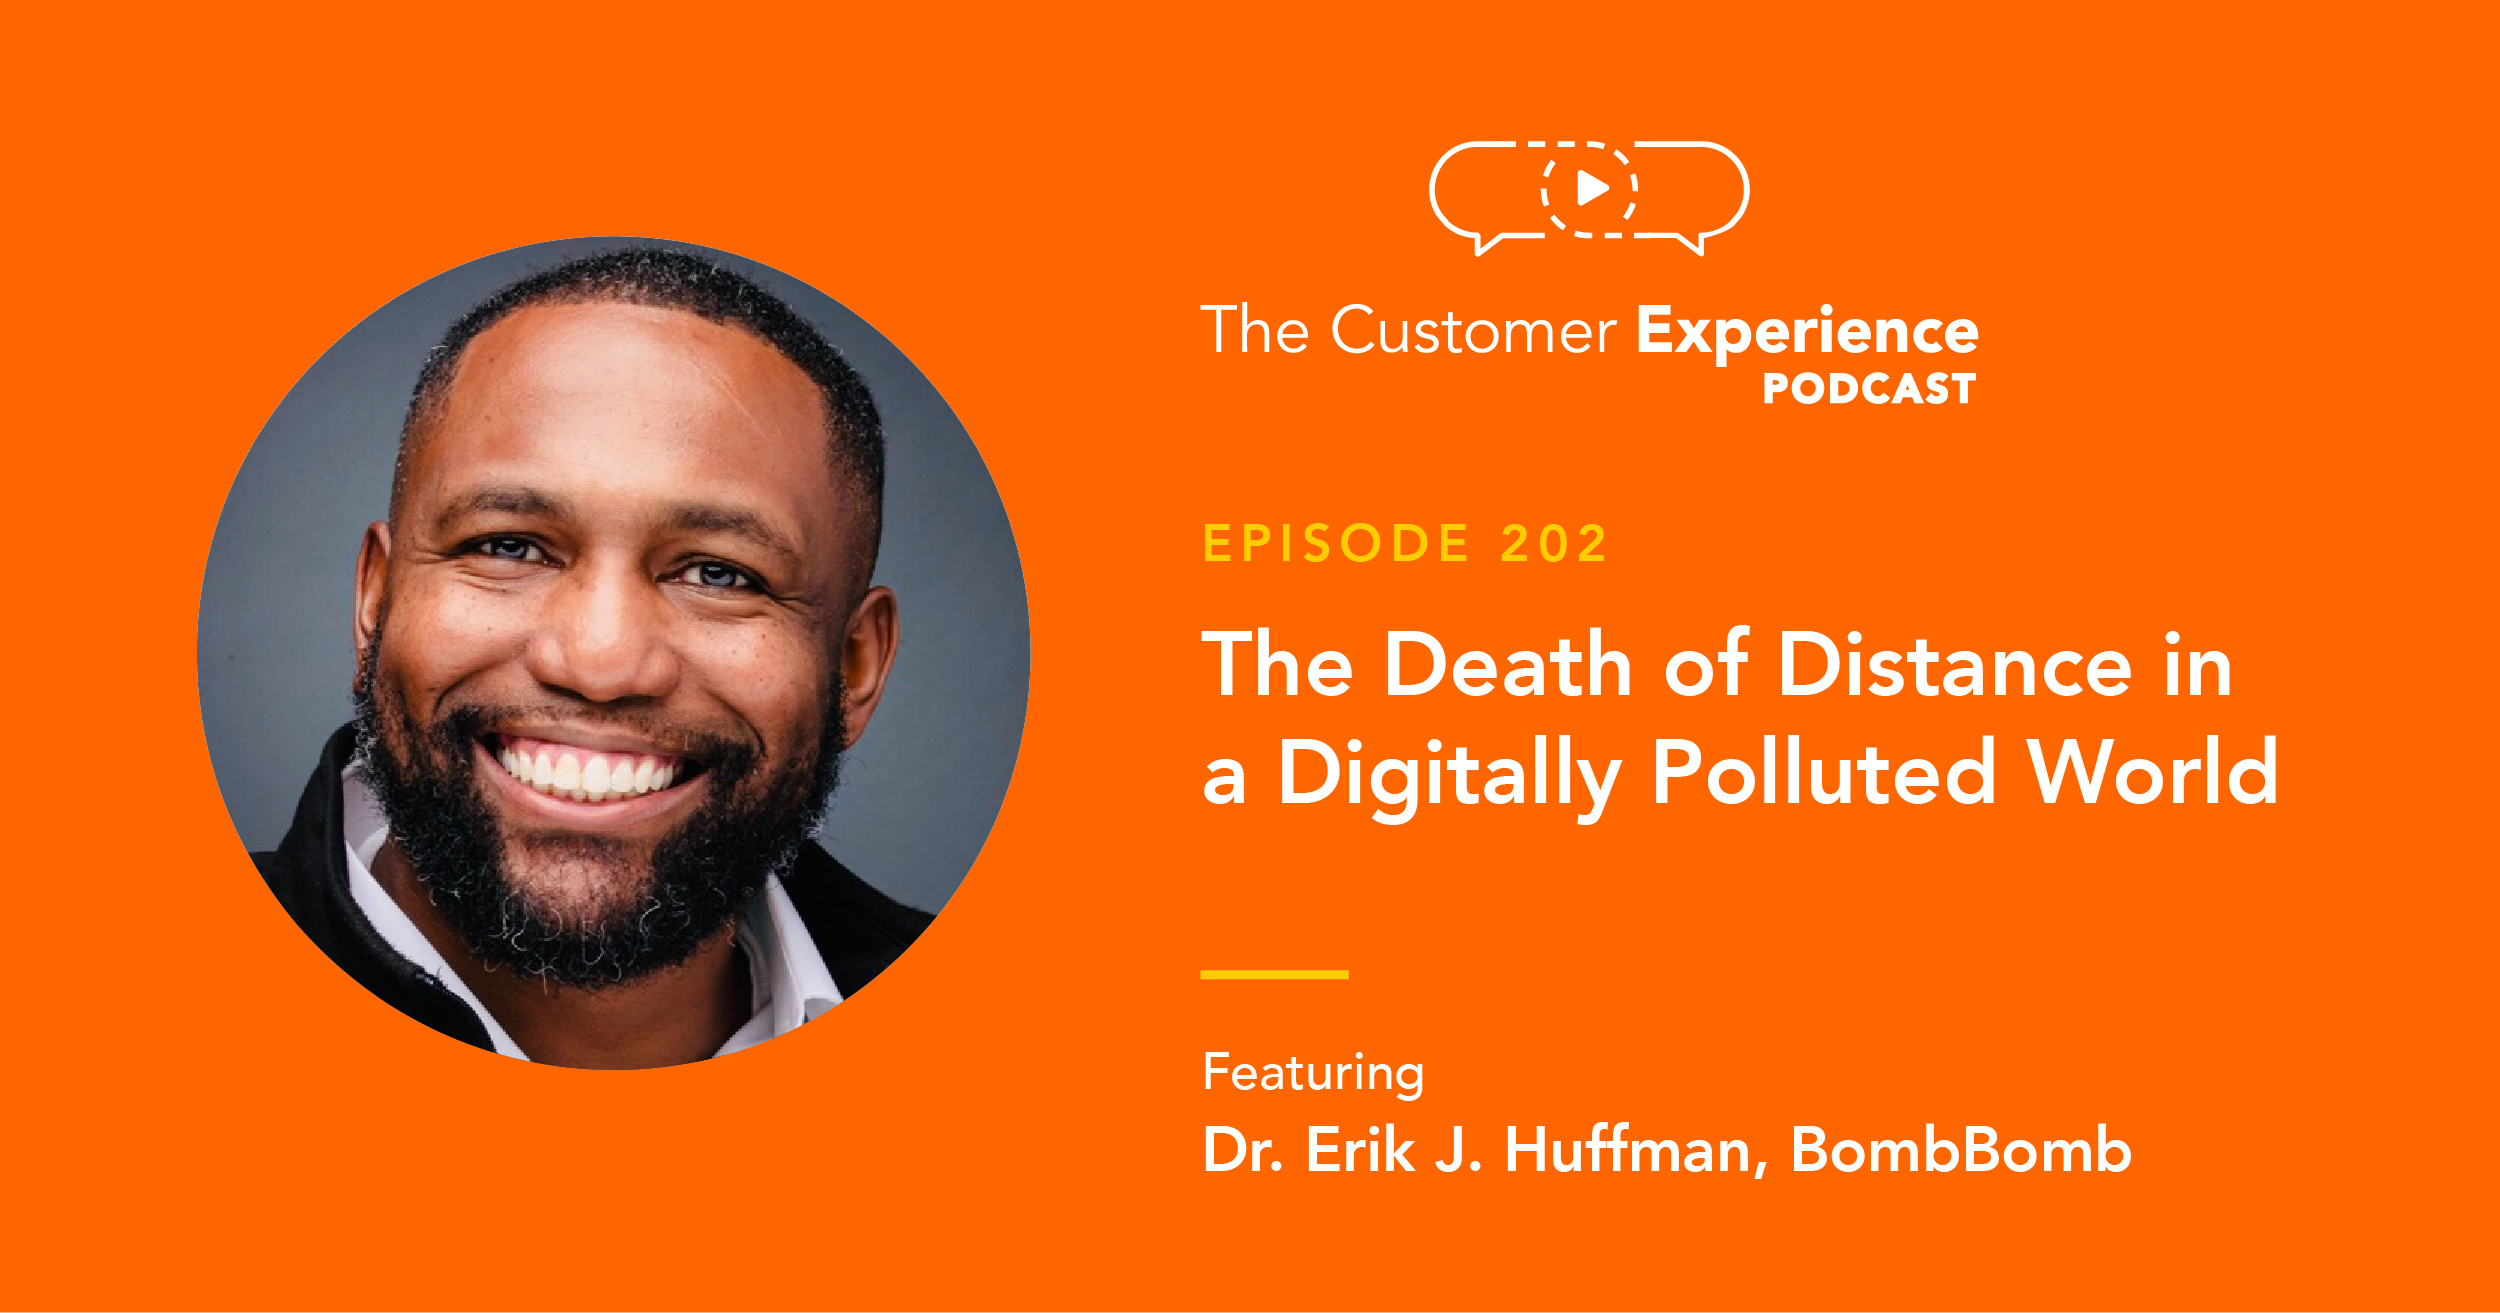 Dr. Erik Huffman, Erik Huffman, BombBomb, The Customer Experience Podcast, Digital Pollution, cybersecurity, cyberpsychology, death of distance, cyber